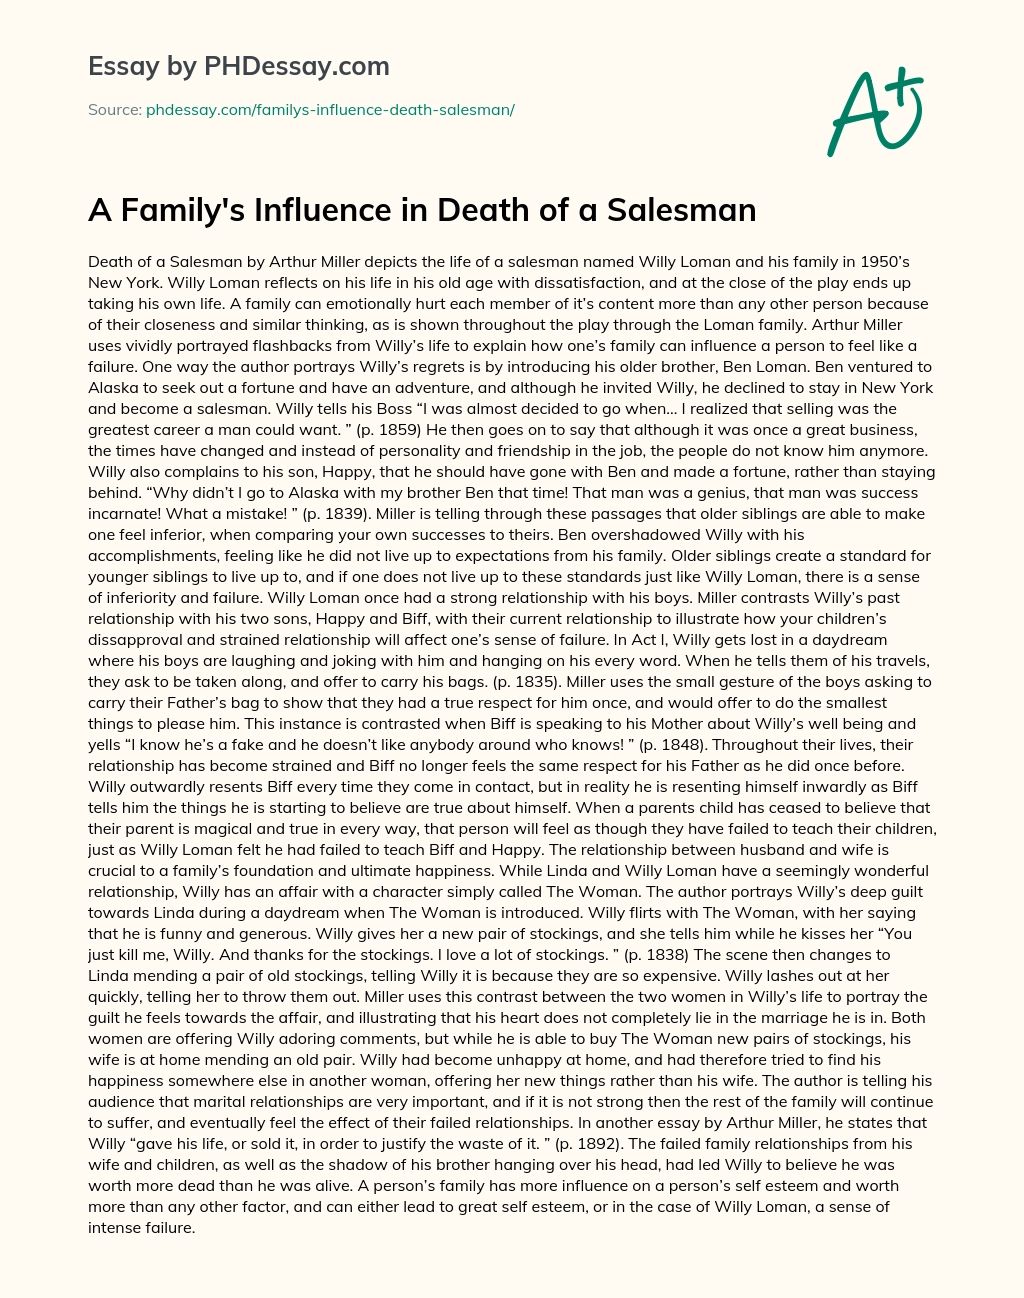 A Family’s Influence in Death of a Salesman essay